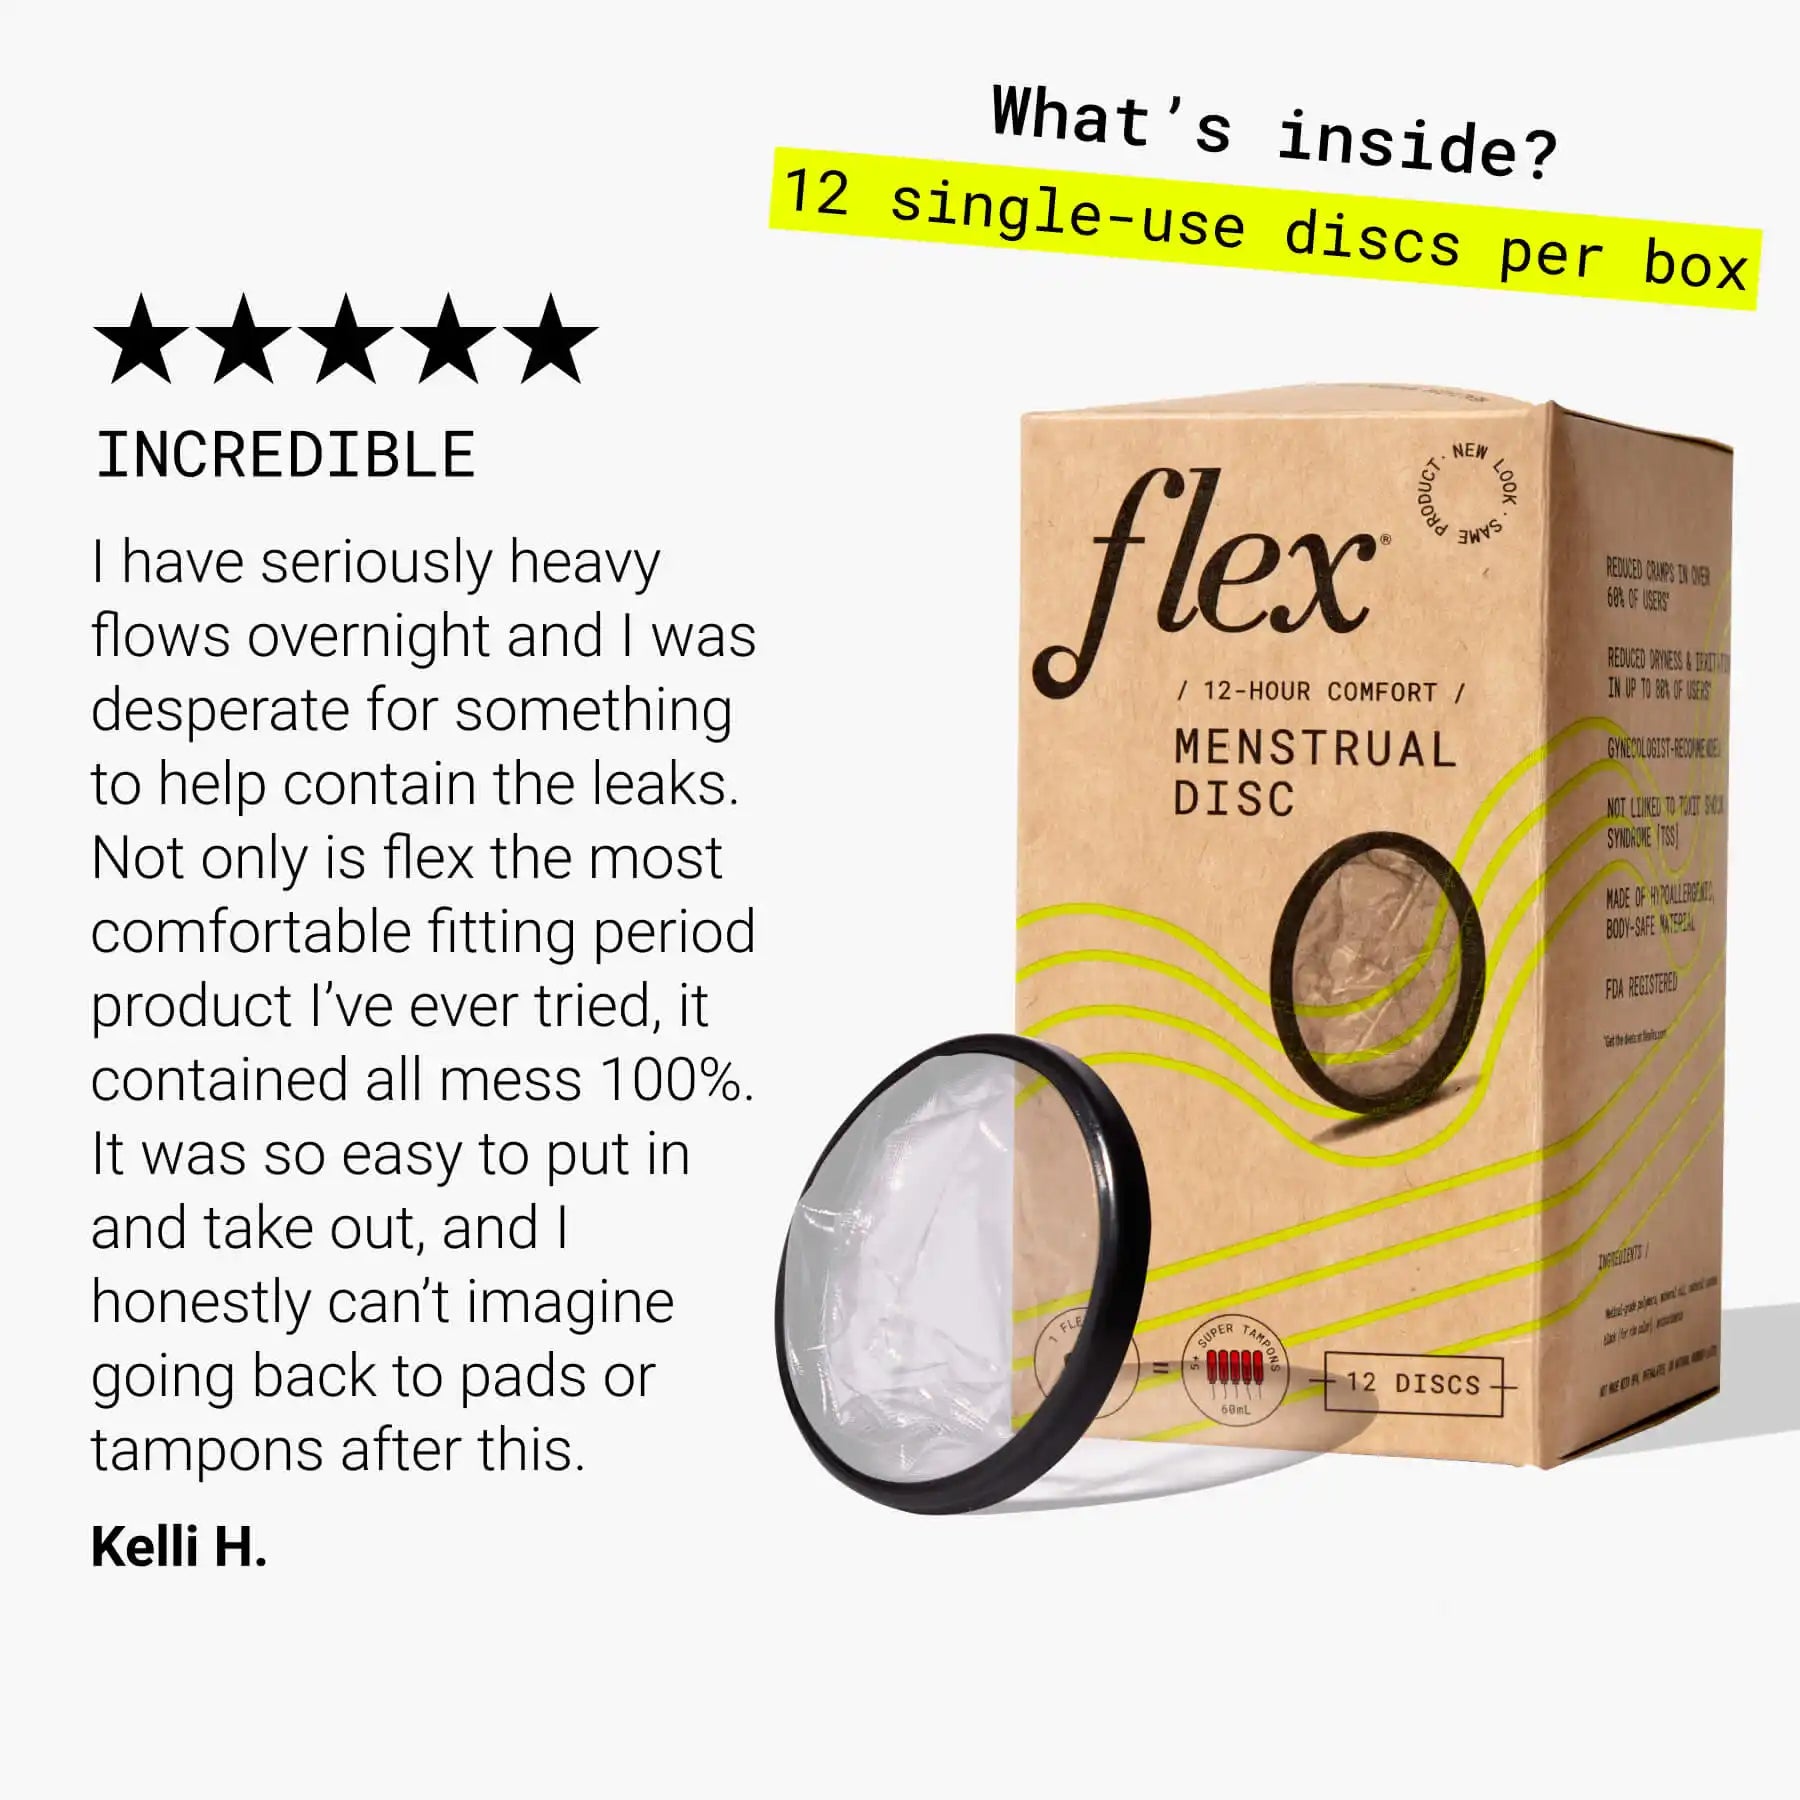 The Flex Company - Say ✌🏼 to your tampons and upgrade to Flex